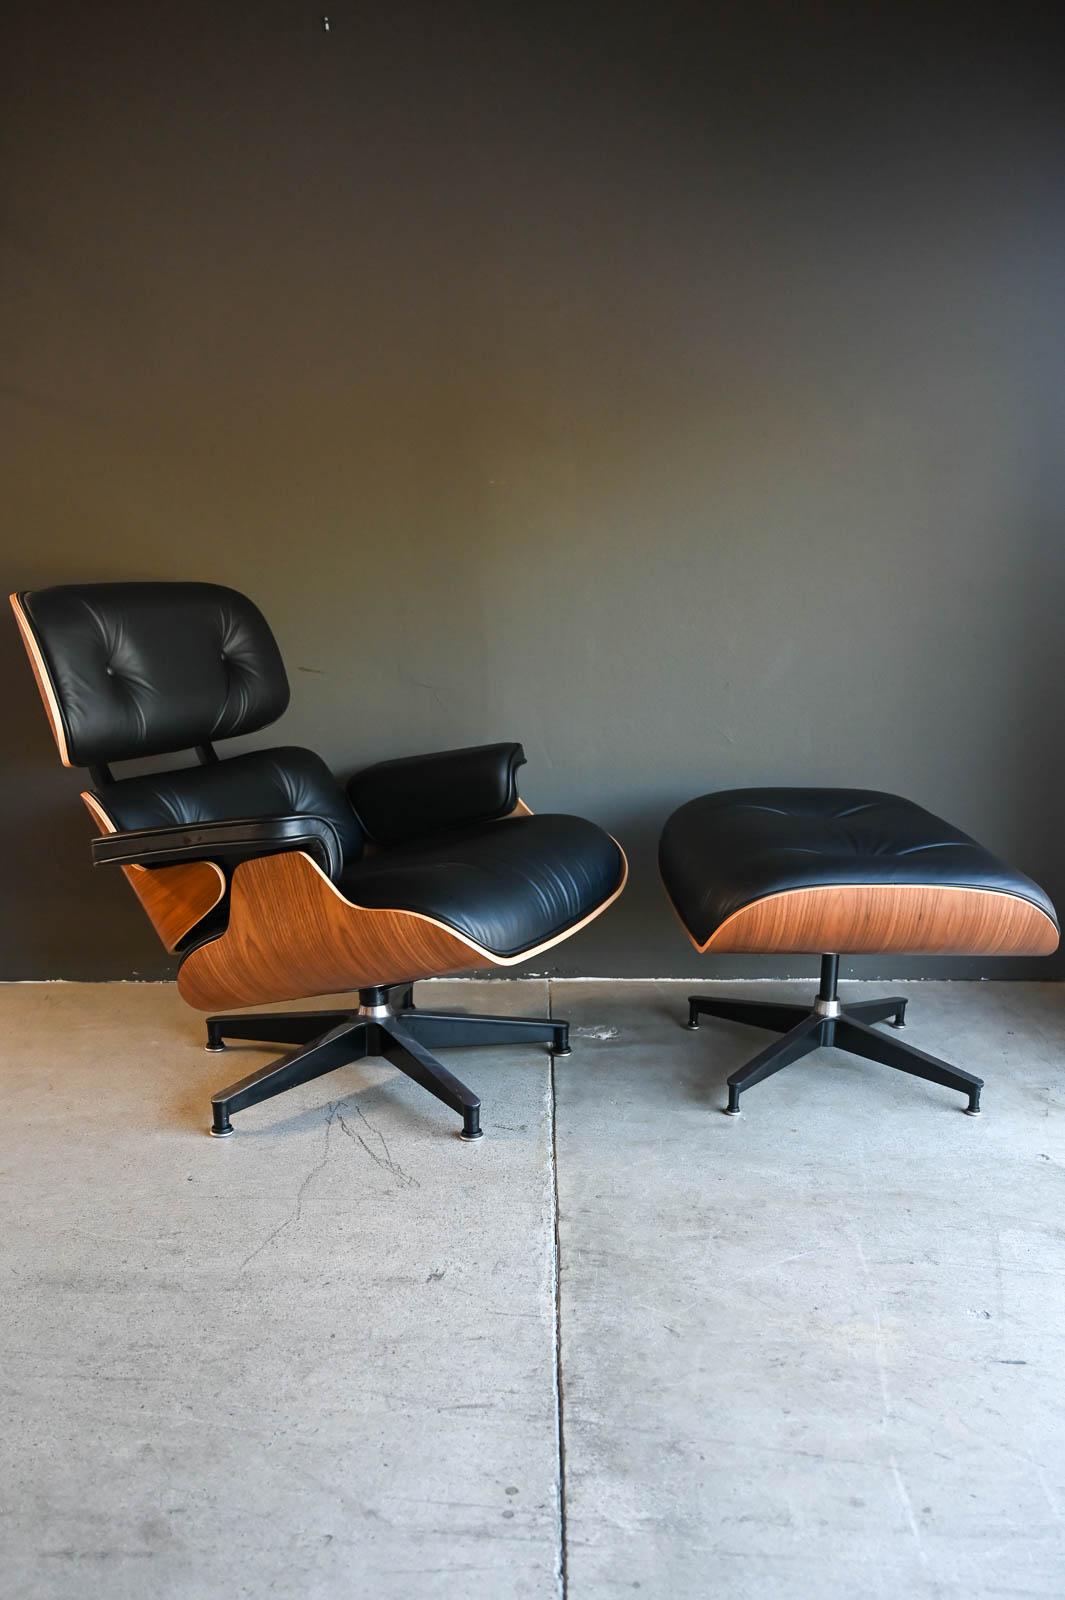 Charles Eames for Herman Miller 670/671 Lounge Chair and Ottoman, 2021.  Beautiful near new Charles Eames Lounge chair with ottoman in desirable 2100 series smooth black leather.  Chair was never used, just for staging and is in excellent like new